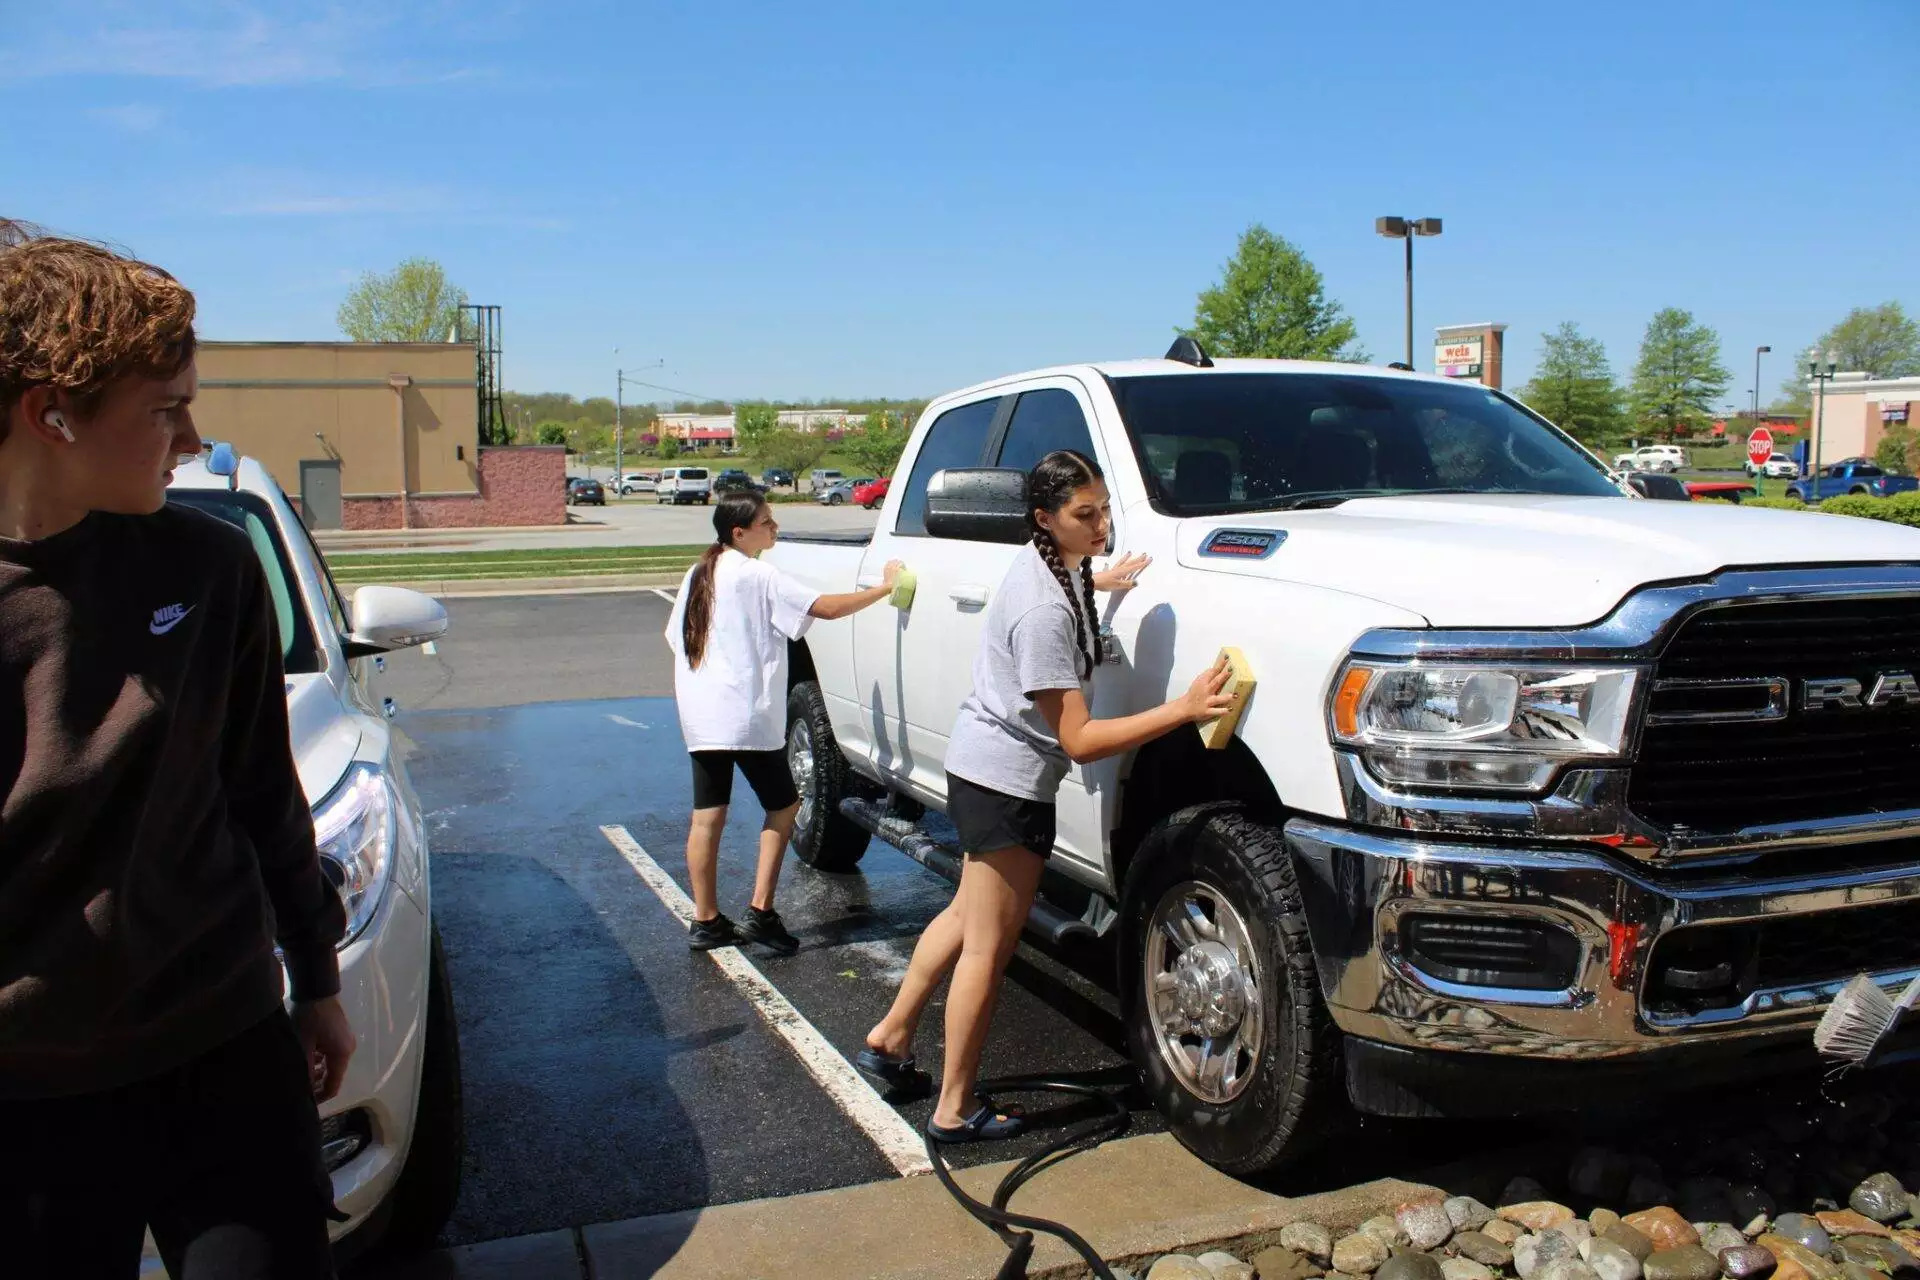 Three people washing a white pickup truck in a sunny parking lot.